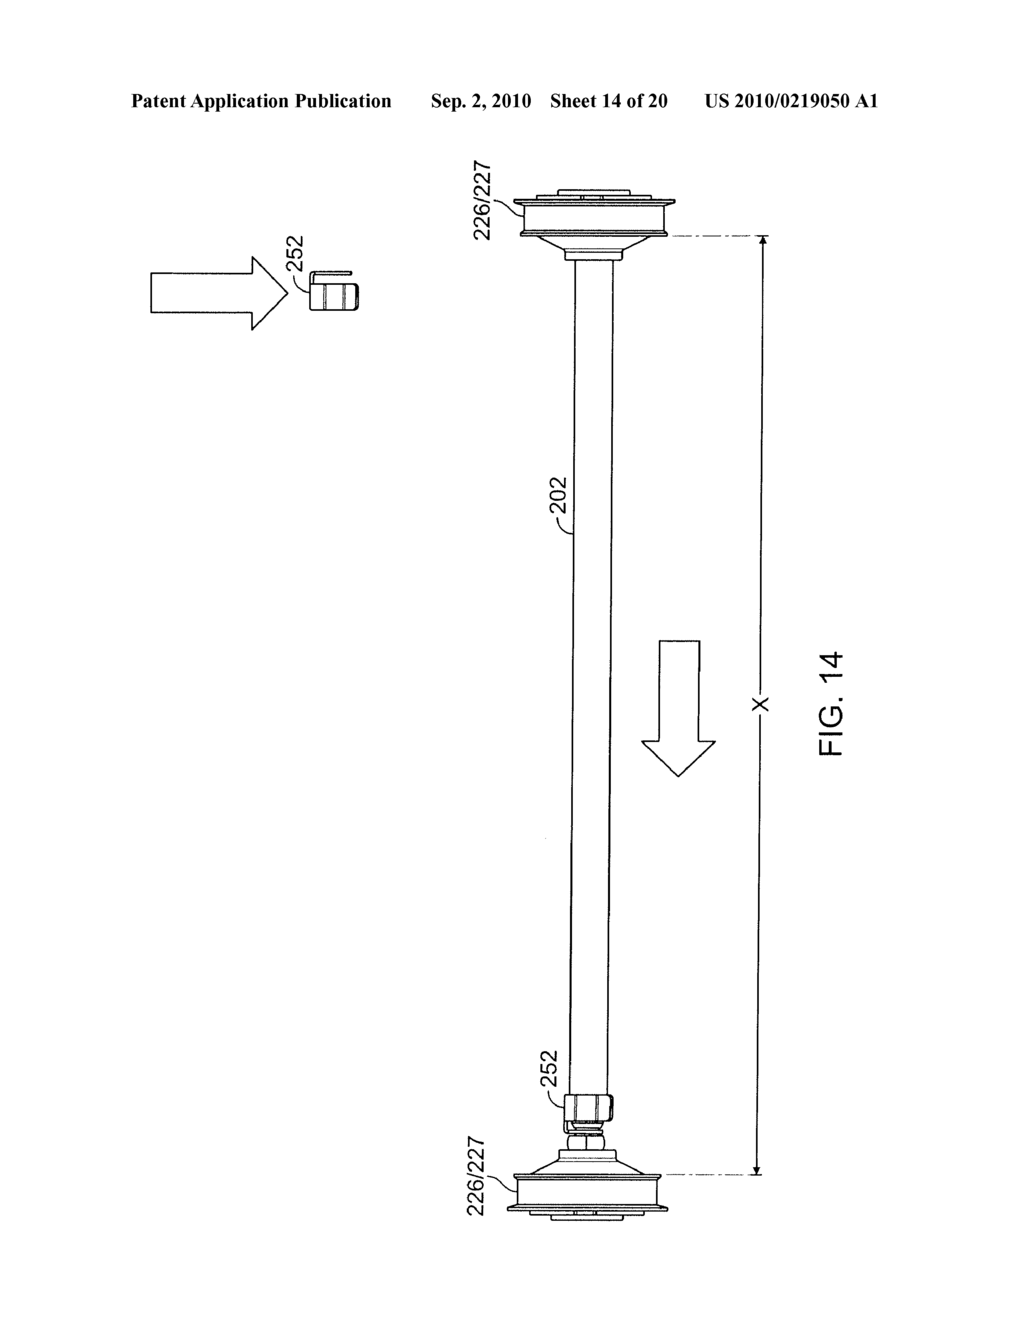 DIRECT DRIVE MODULAR BELT CONVEYOR, CARTRIDGE, AND QUICK CONNECT-DISCONNECT CONSTANT VELOCITY DRIVE SHAFT, FOR HIGH SPEED FOUP TRANSPORT - diagram, schematic, and image 15